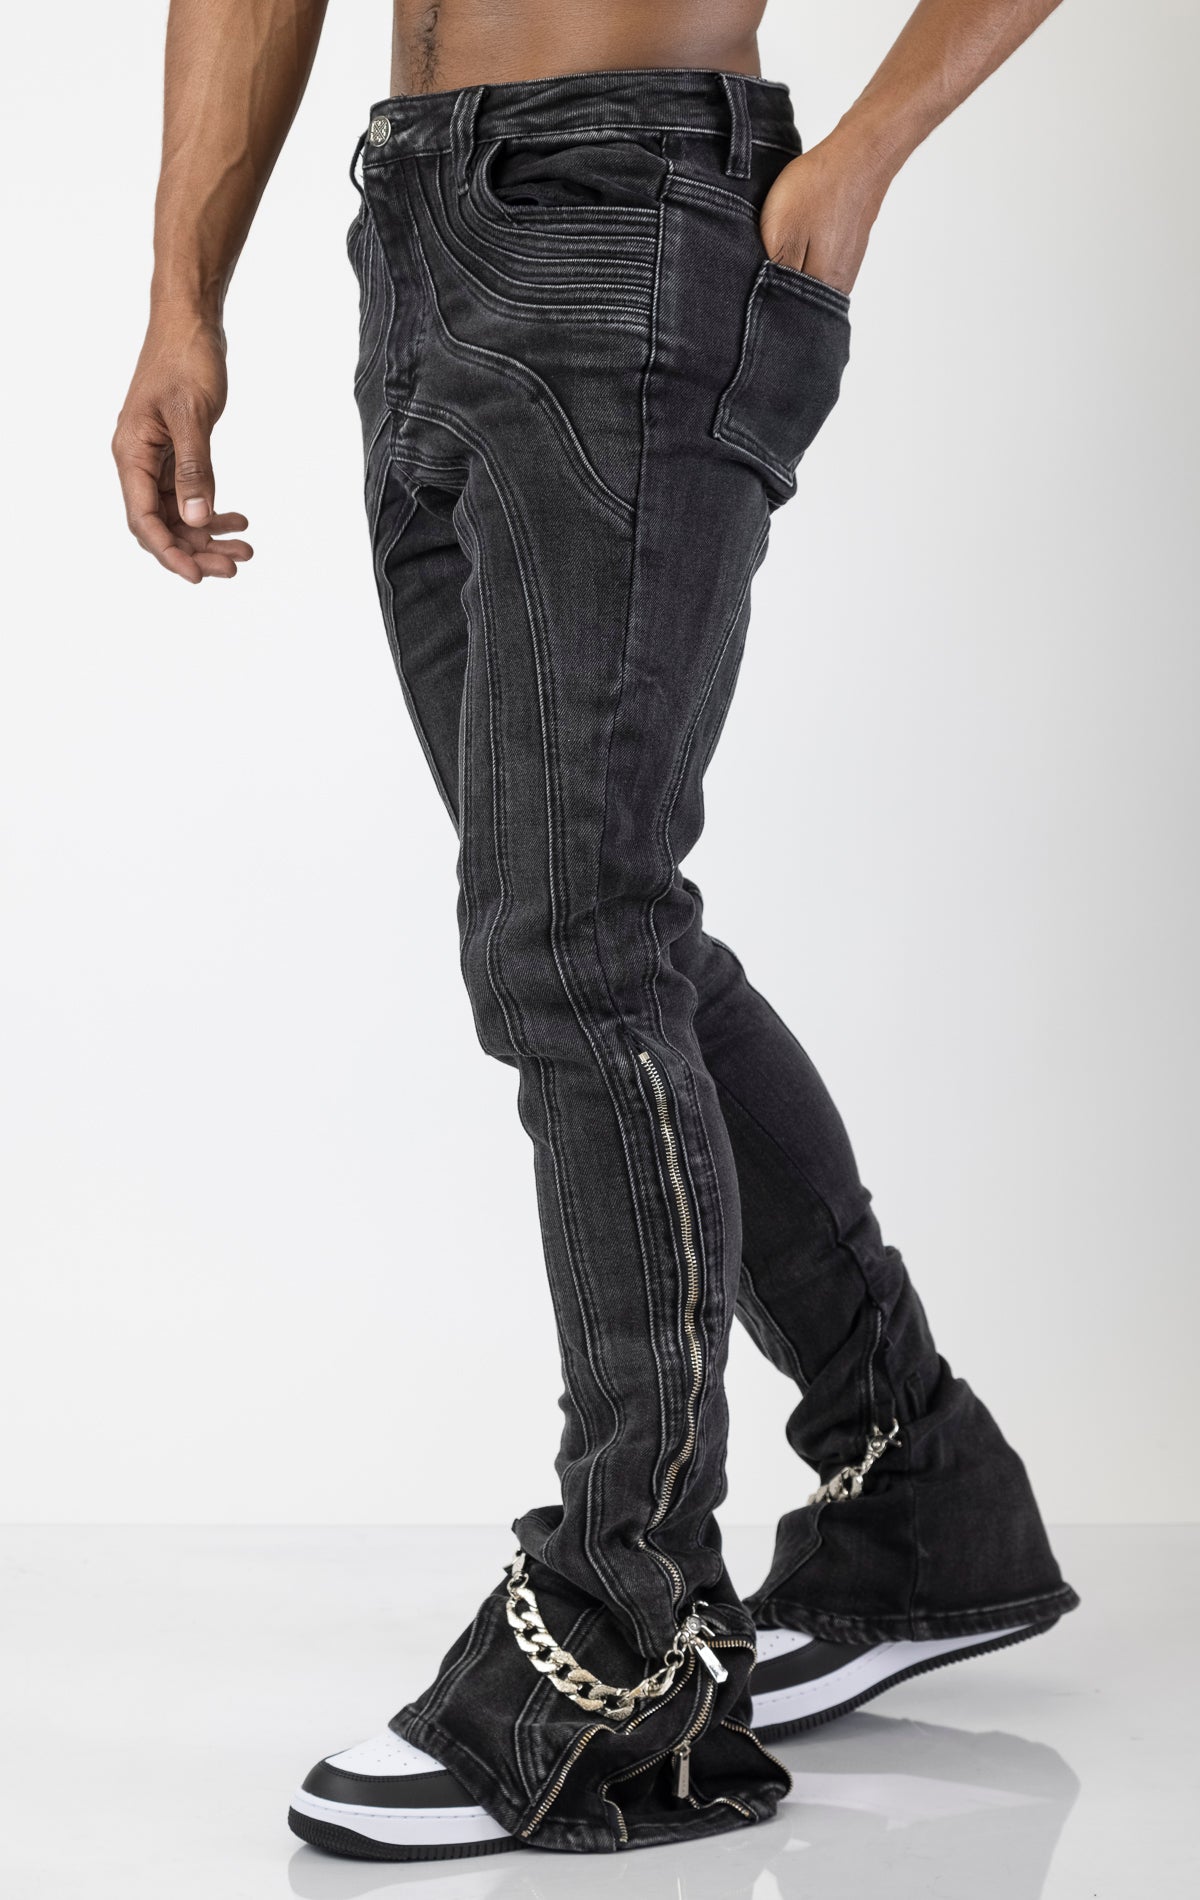 Men's black jeans with a unique stacked iron chain hardware embellishments at the ankle. The jeans have a skinny fit (size up for a more relaxed fit)